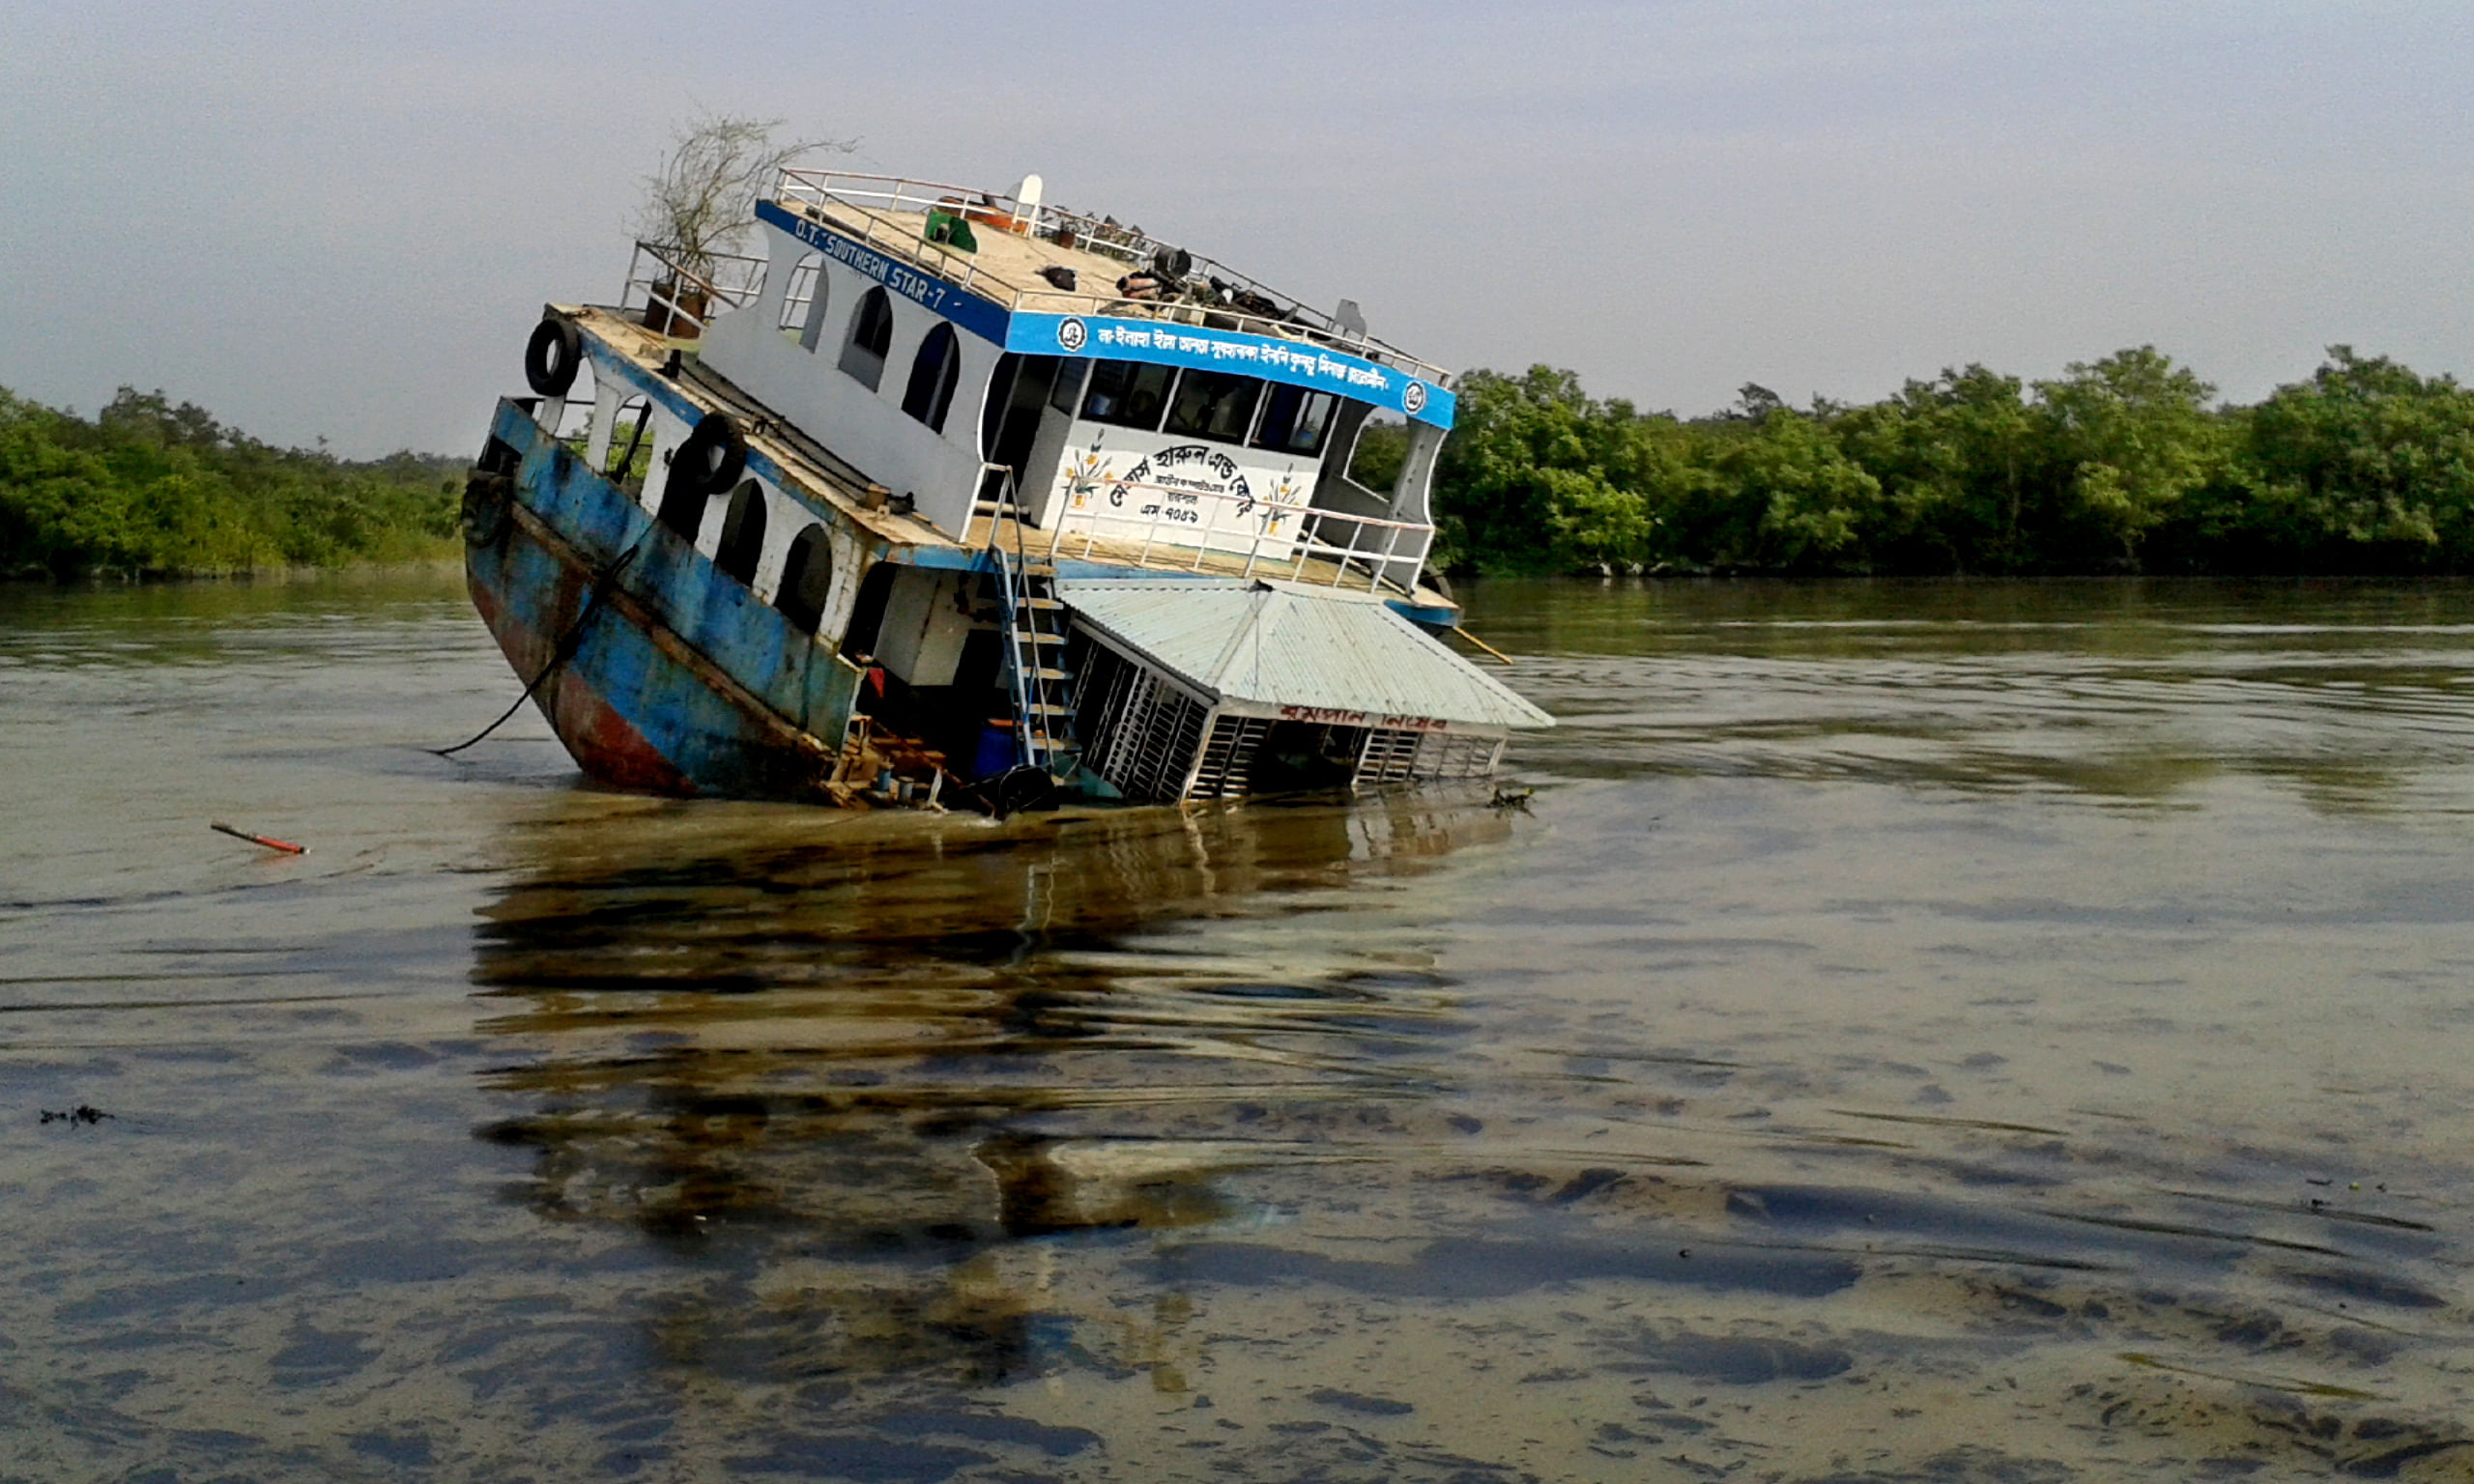 The oil tanker that sank in Shela river in the Sundarbans on Tuesday. Photo: Star